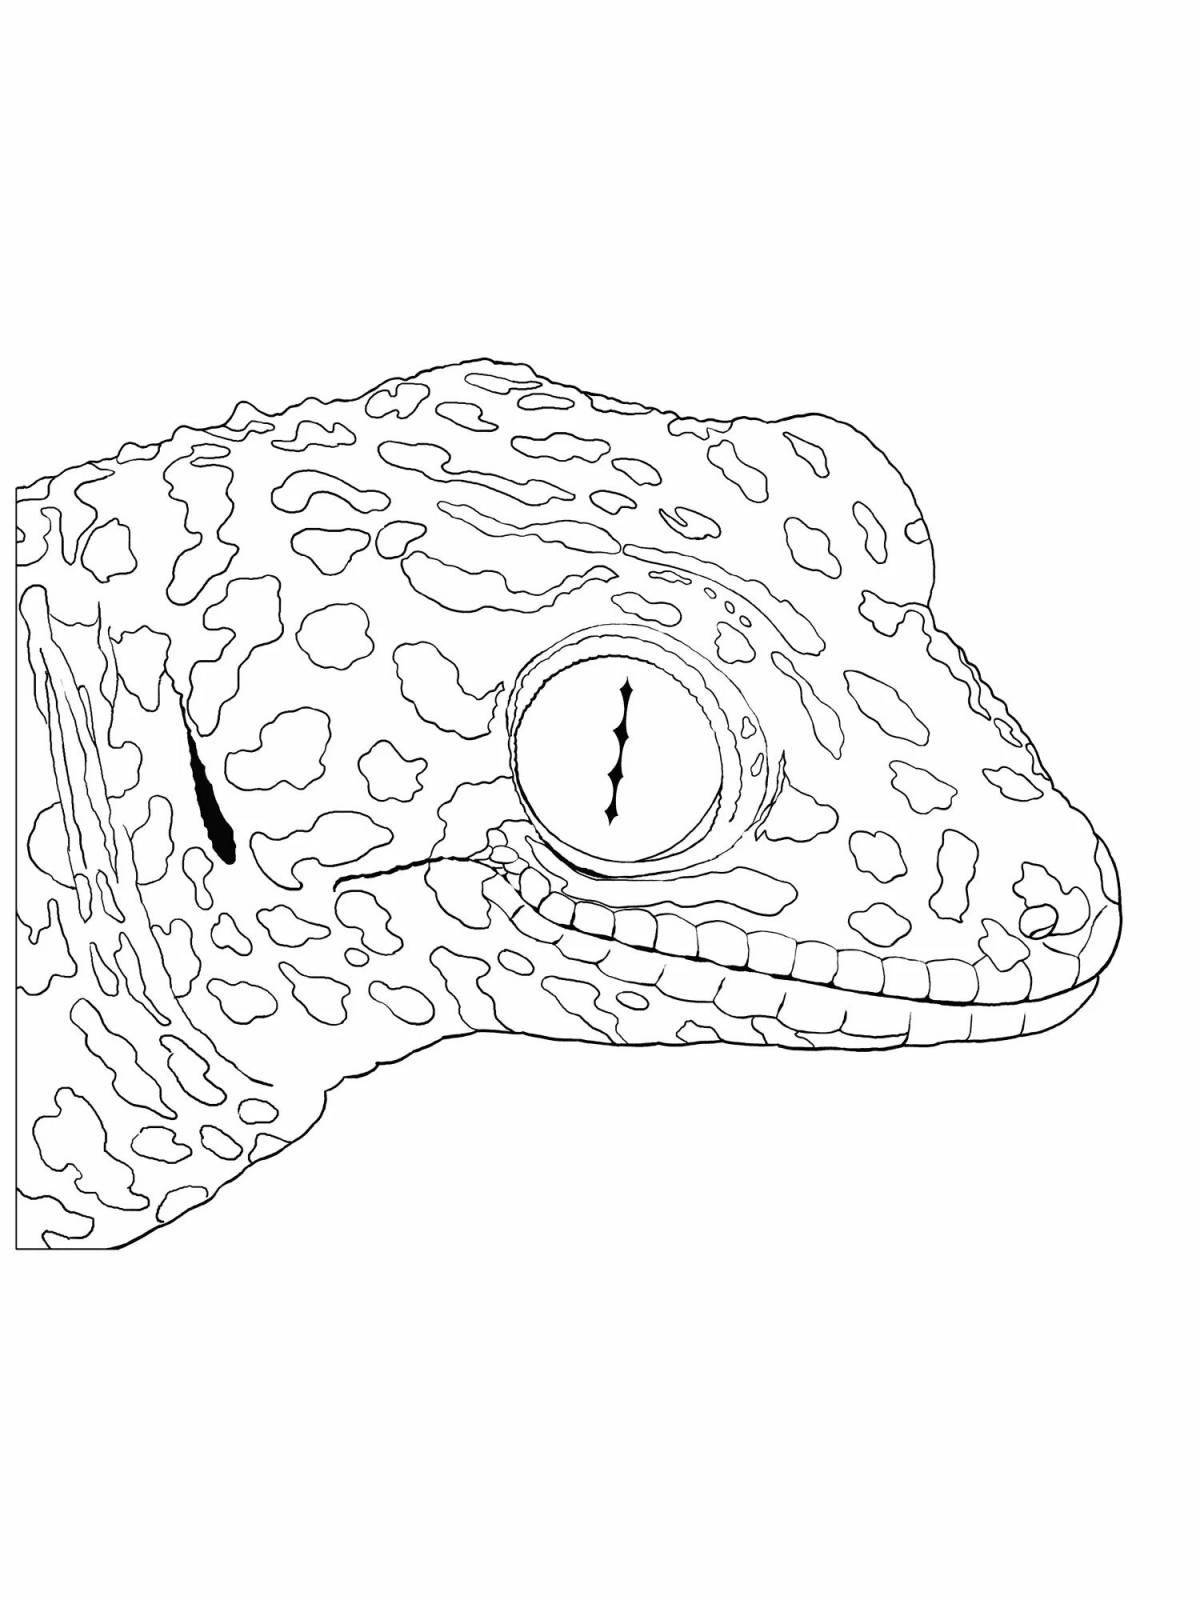 Great gecko coloring book